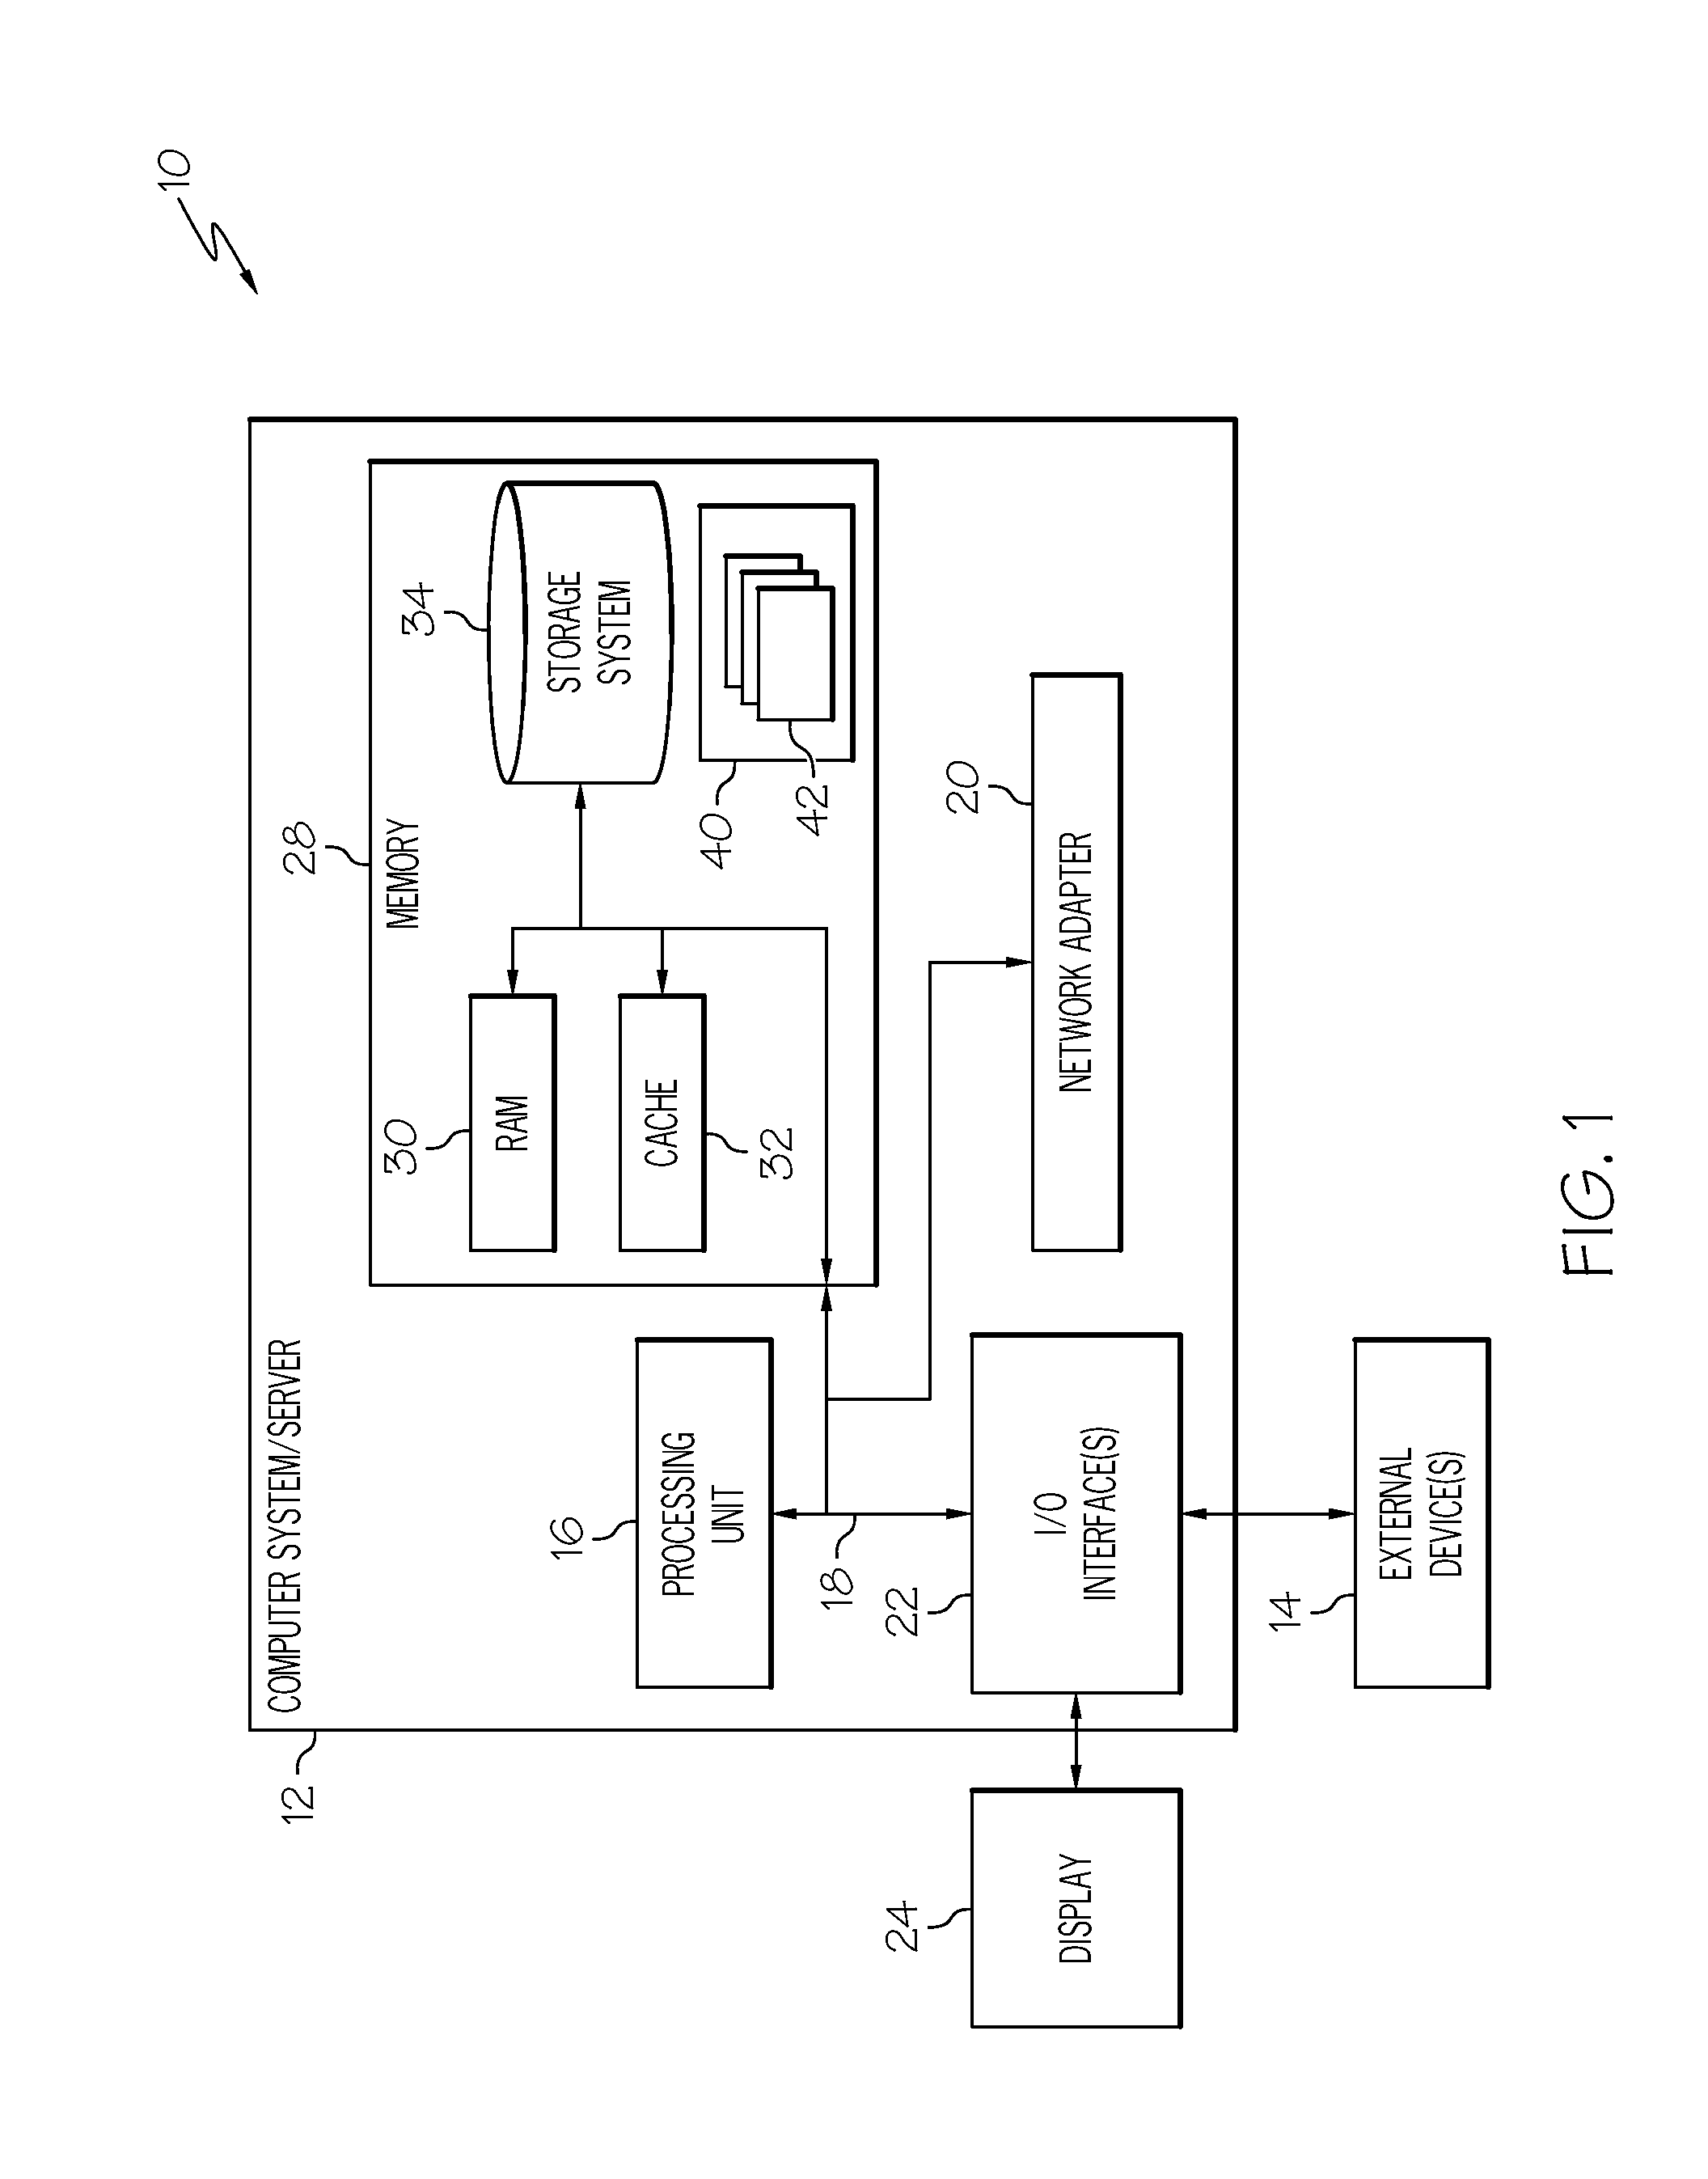 System, method and program product for providing automatic speech recognition (ASR) in a shared resource environment